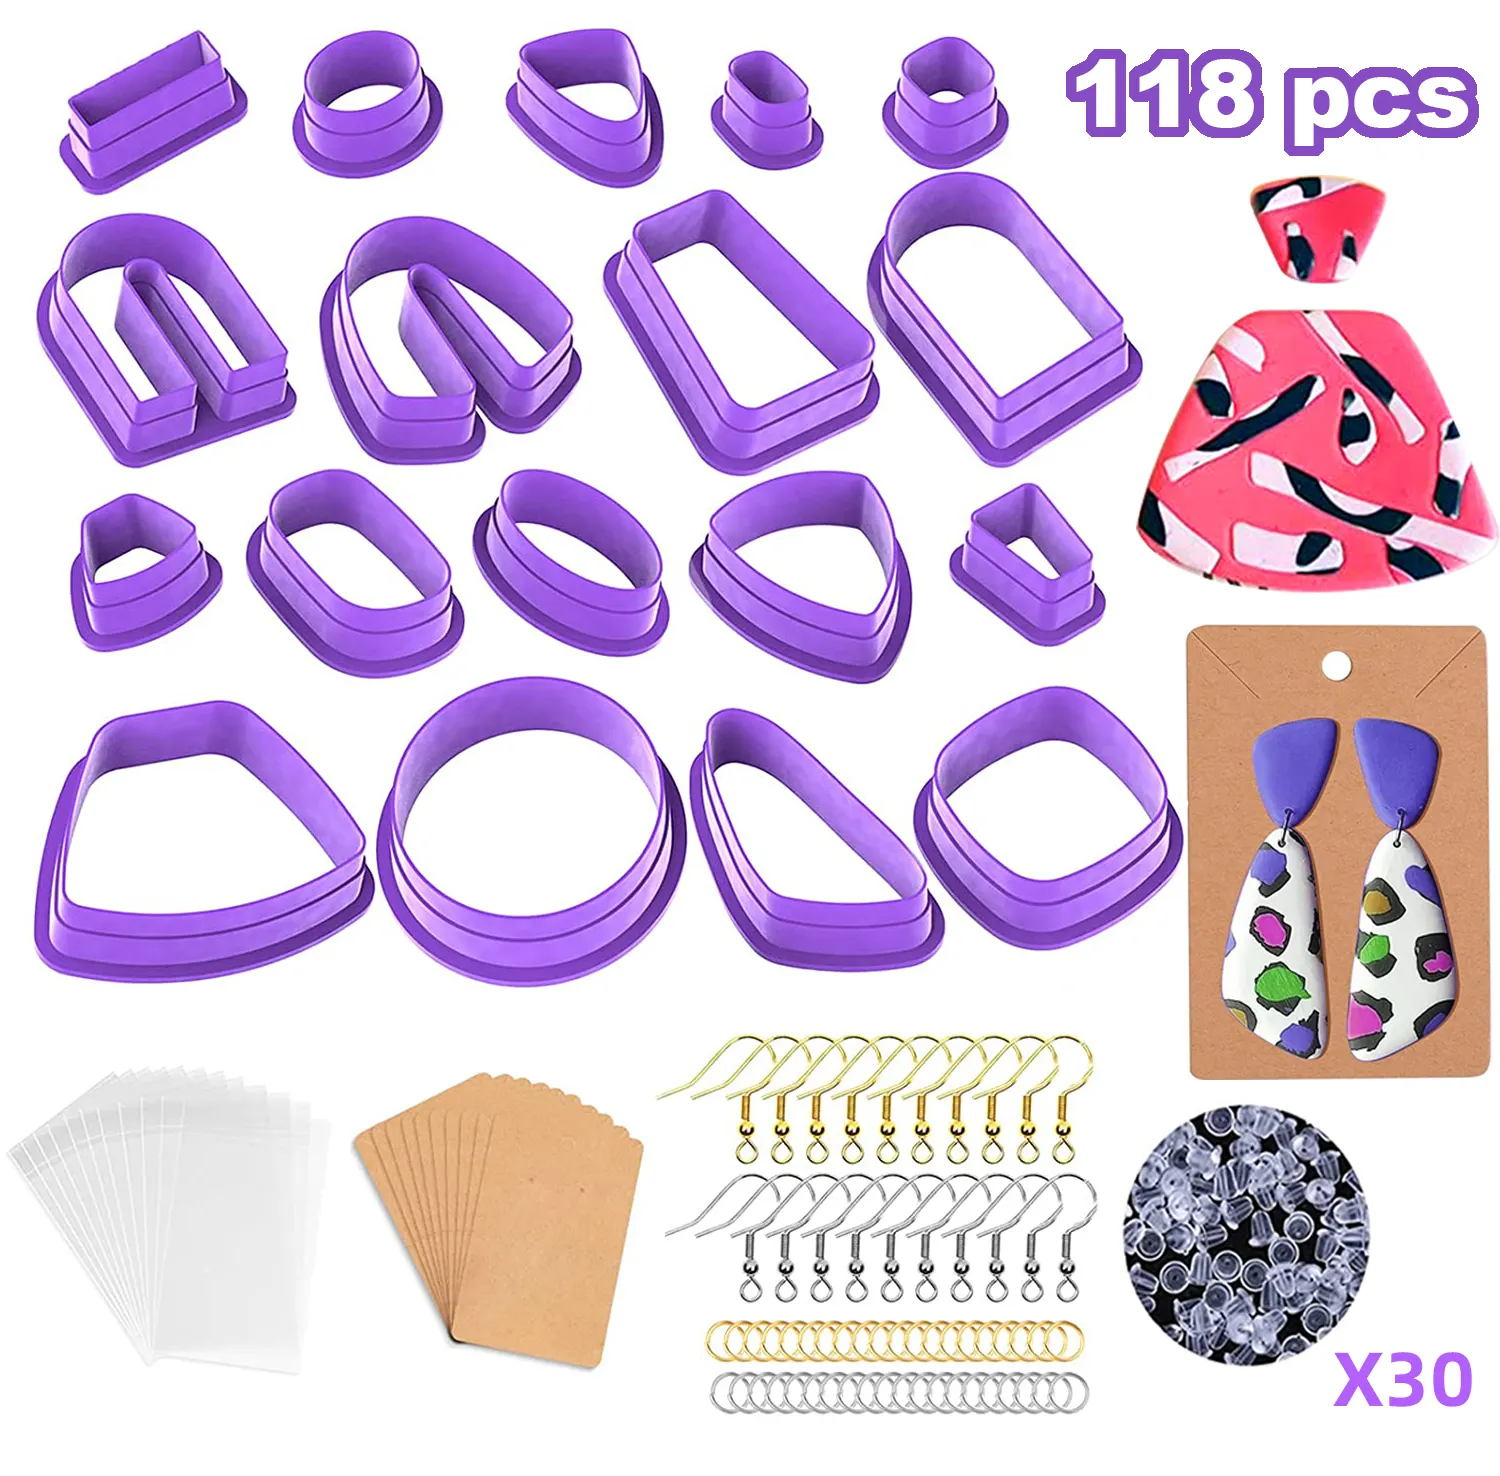 2022 New Hot Sale 118pcs Different Shape Plastic Polymer Clay Earring Cutter Earring Making Mold For Cookie Cutter